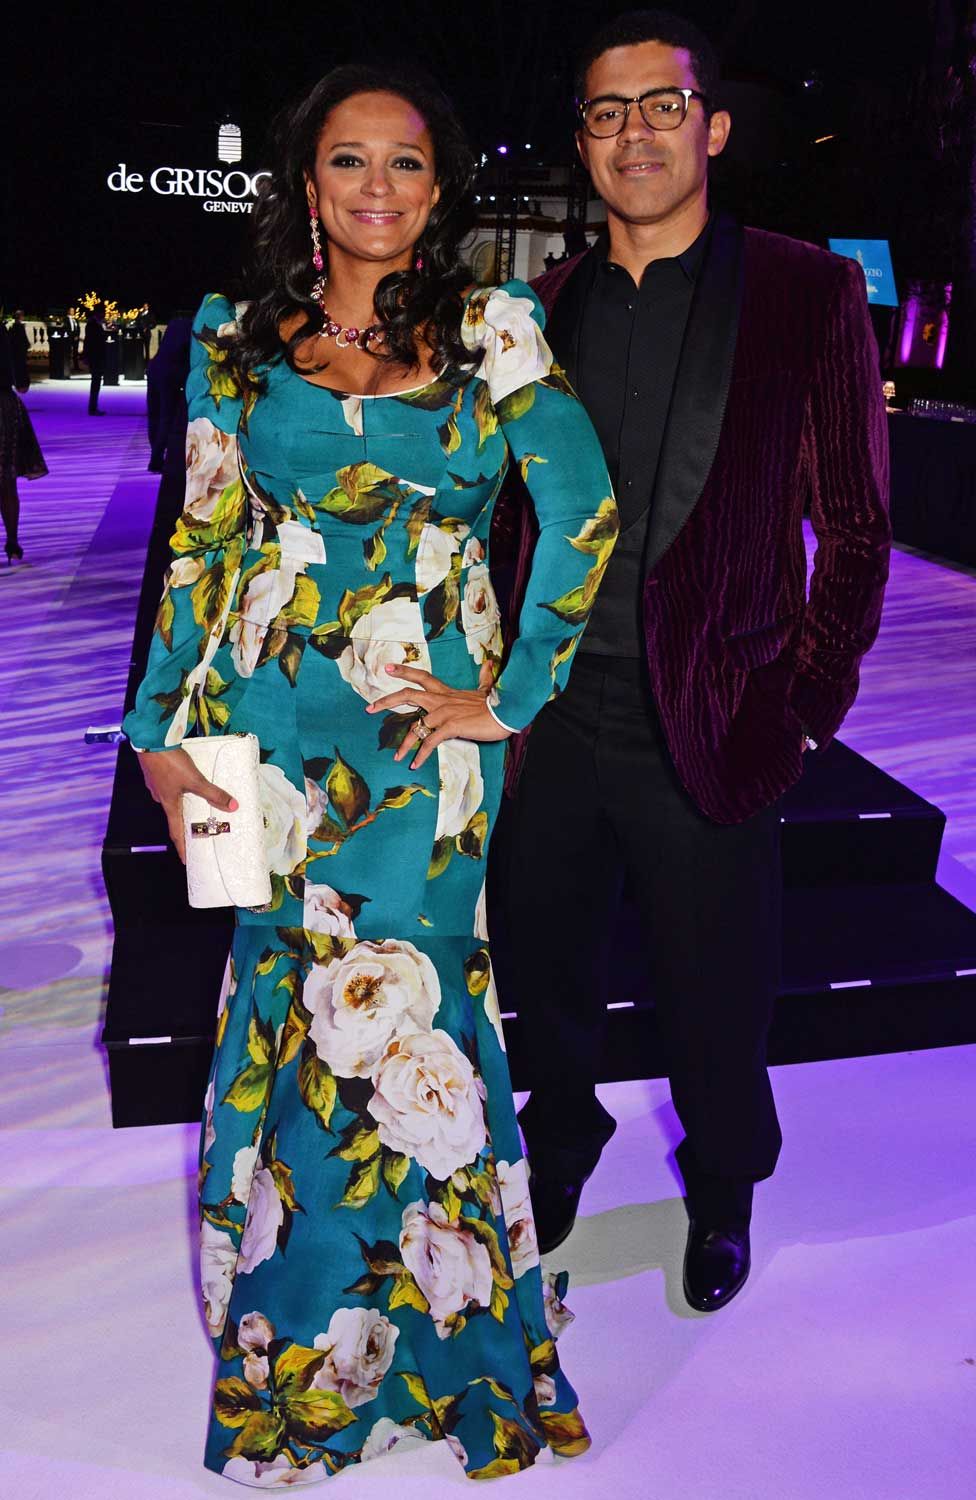 Isabel dos Santos and Sindika Dokolo attend the de Grisogono party during the 69th Cannes Film Festival at Hotel du Cap-Eden-Roc on May 17, 2016 in Cap d'Antibes, France